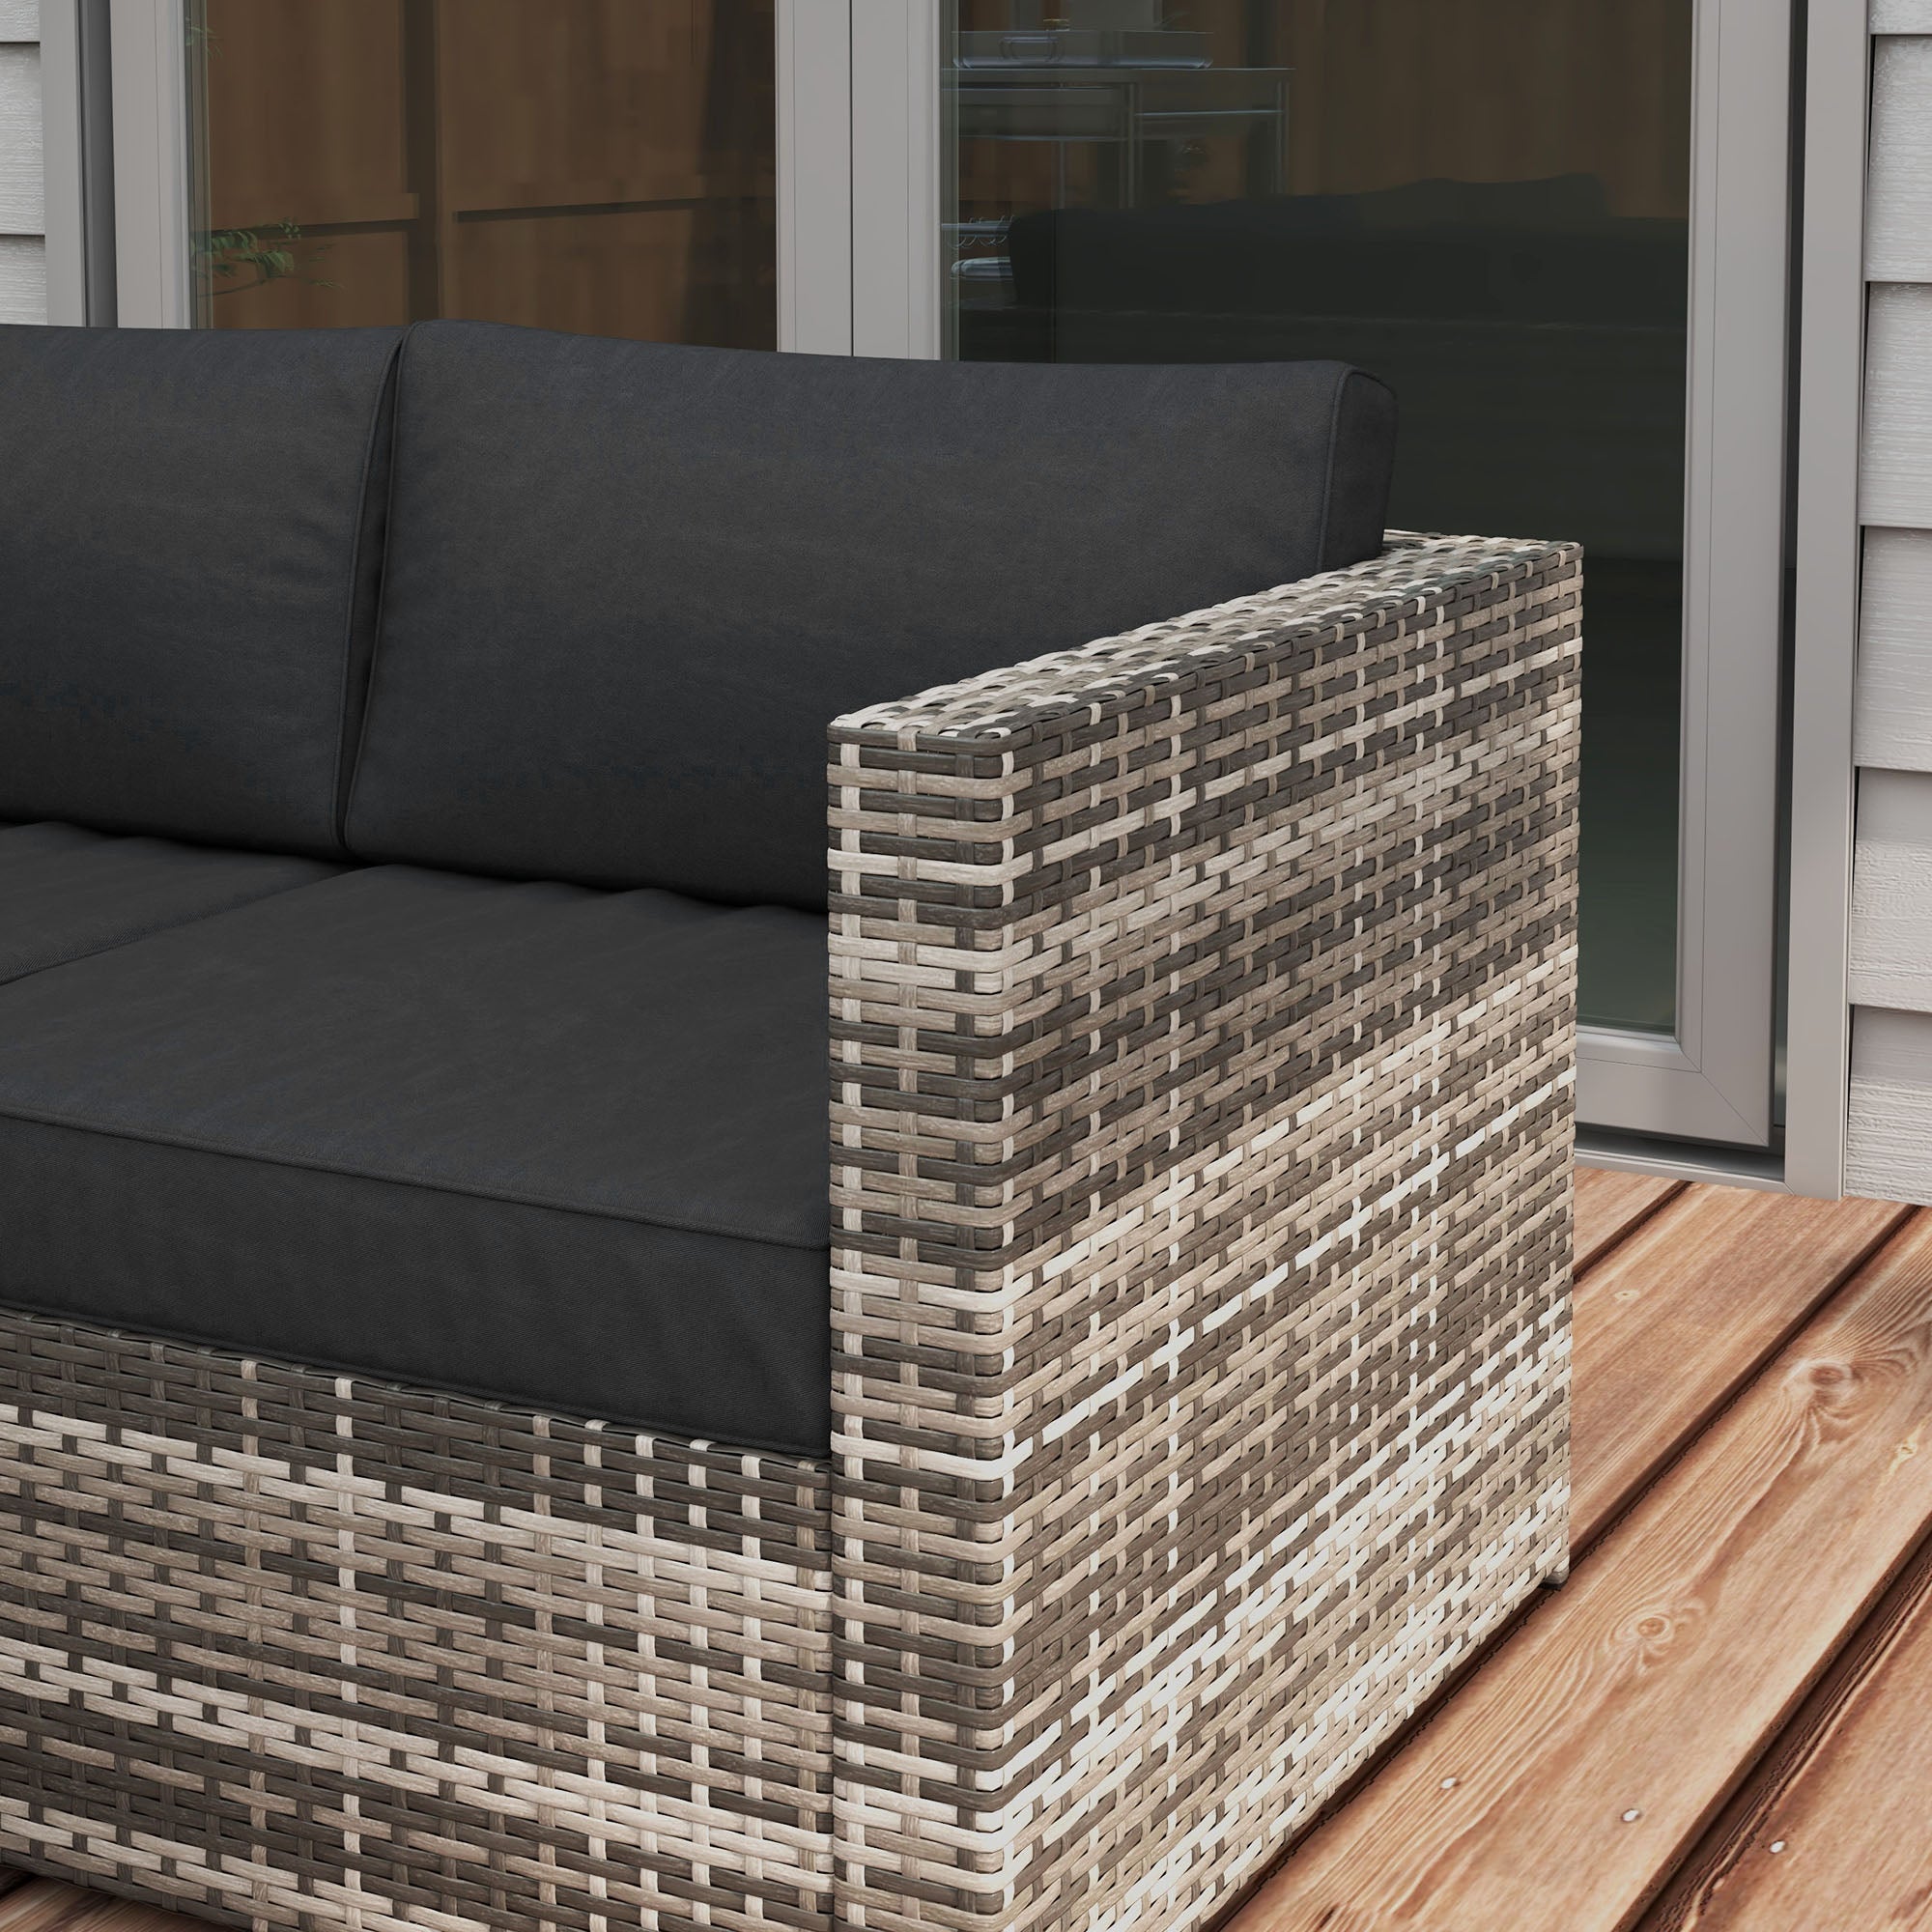 3 Pieces Rattan Wicker Outdoor Conversation Furniture Set w/ Loveseats Coffee Table Cushions for Garden, Patio, Grey Patio Furniture Sets   at Gallery Canada